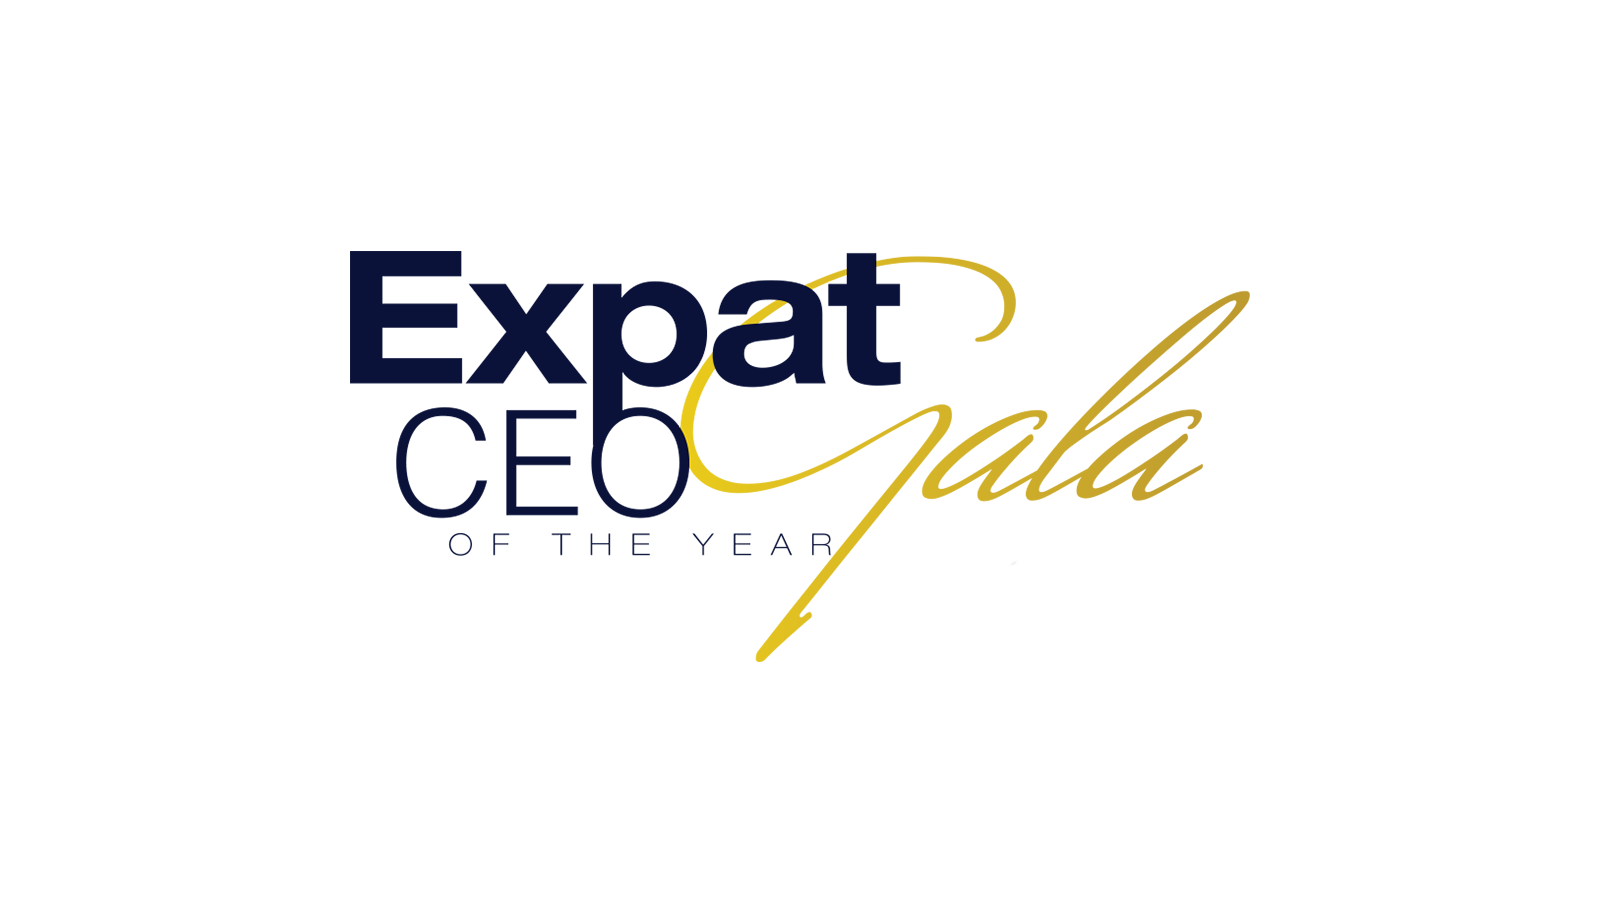 BBJ Expat CEO of the Year shortlist named